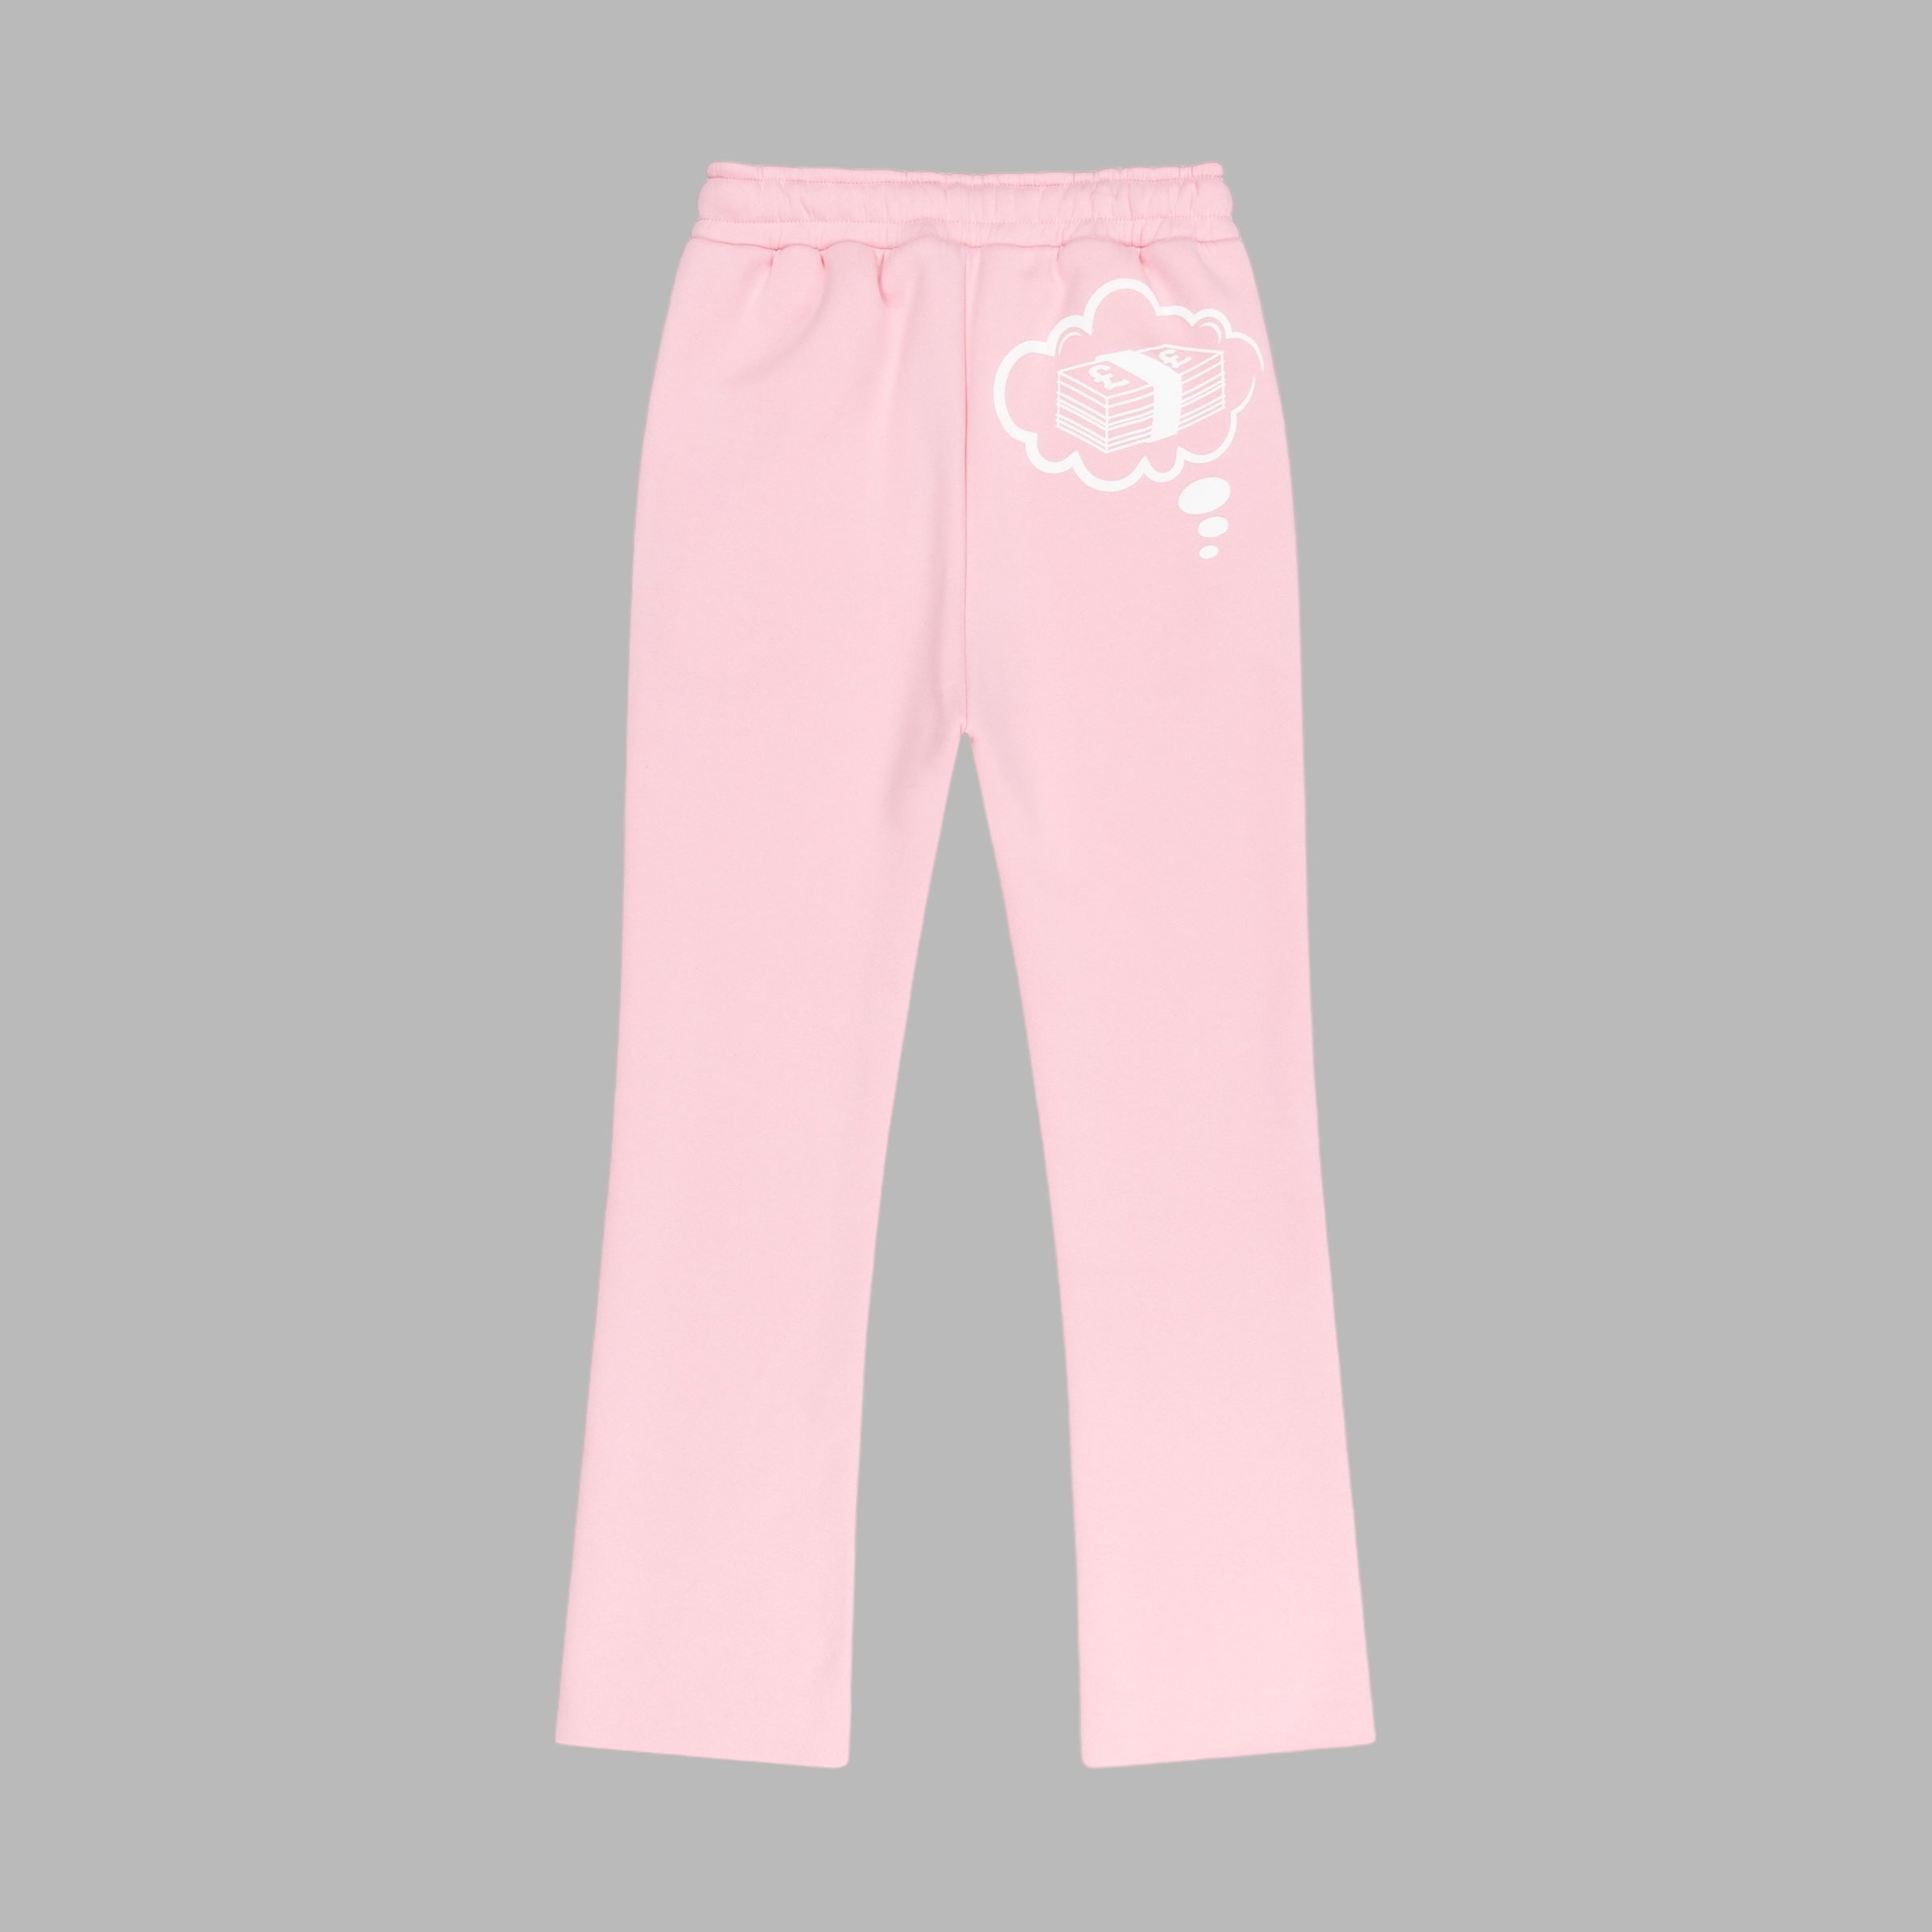 DREAMS JOGGERS | PINK / WHITE